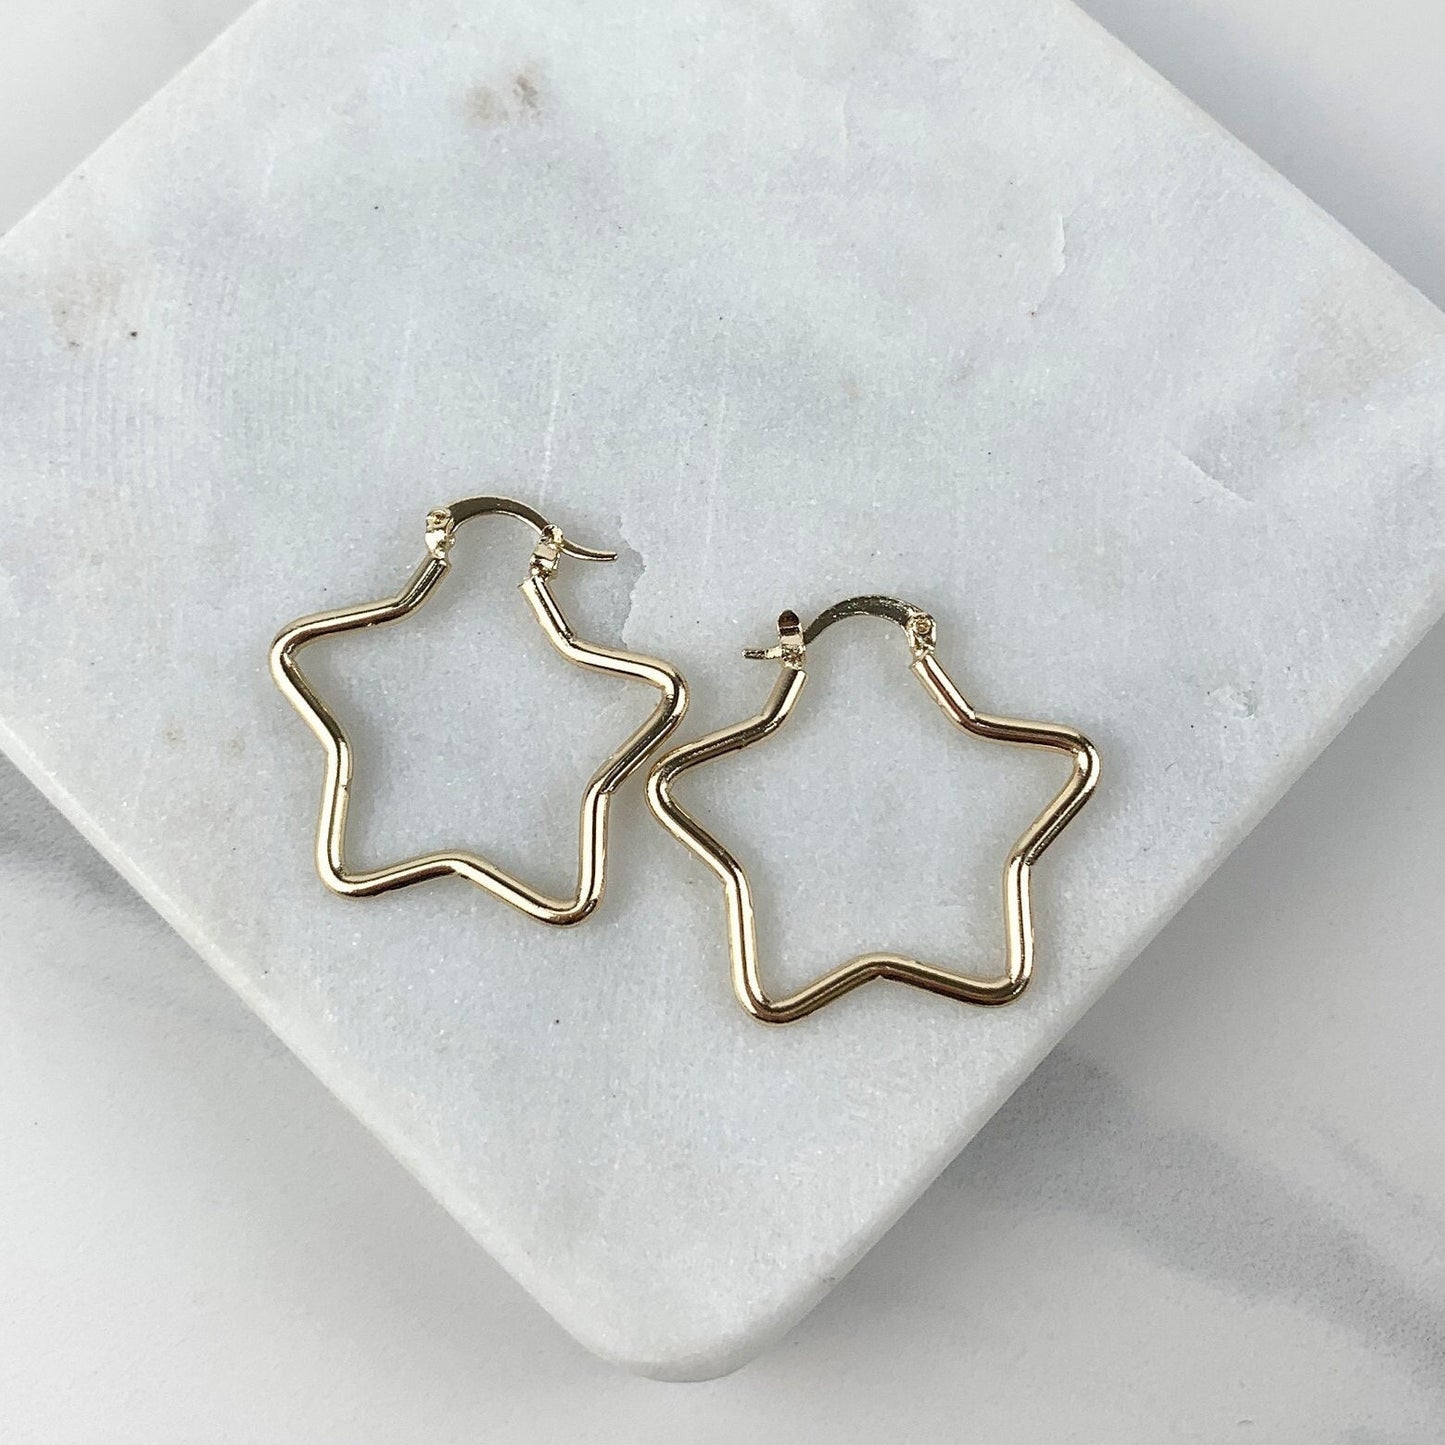 18k Gold Filled 33mm Star Earrings, 2mm Thickness, Wholesale Jewelry Making Supplies